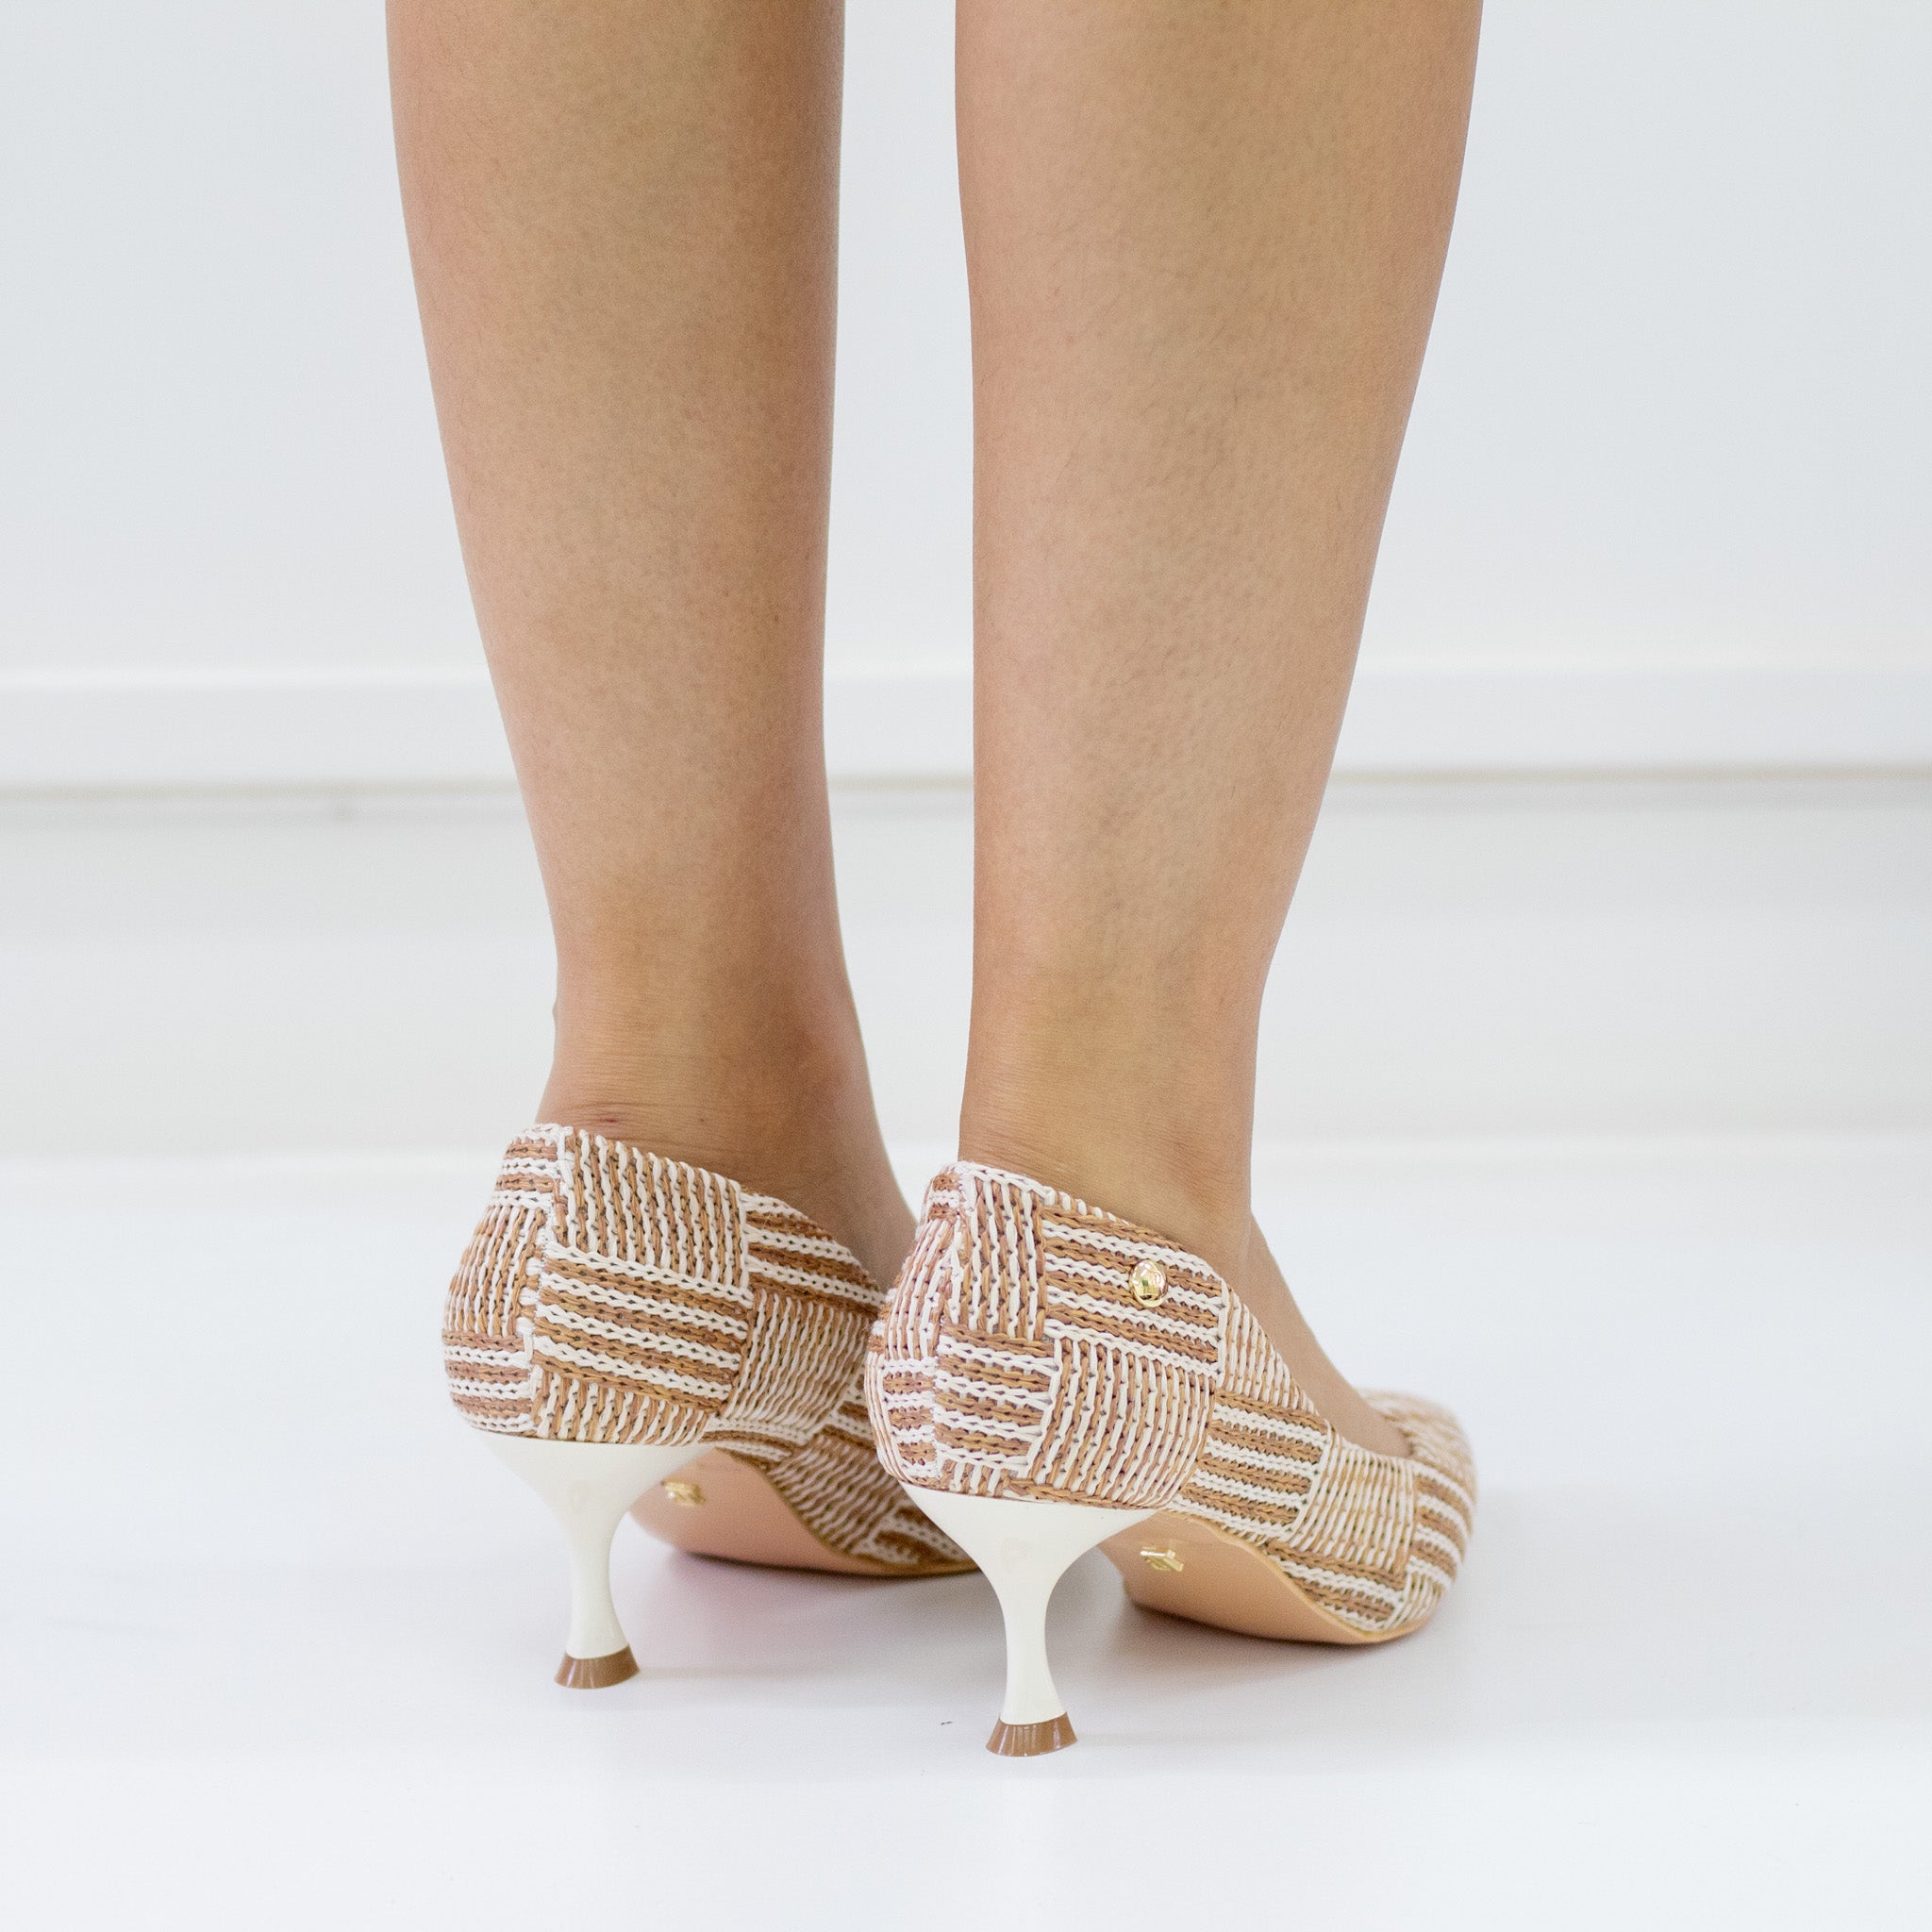 Beige 6.5cm heel knitted pointy multi-colored court merge